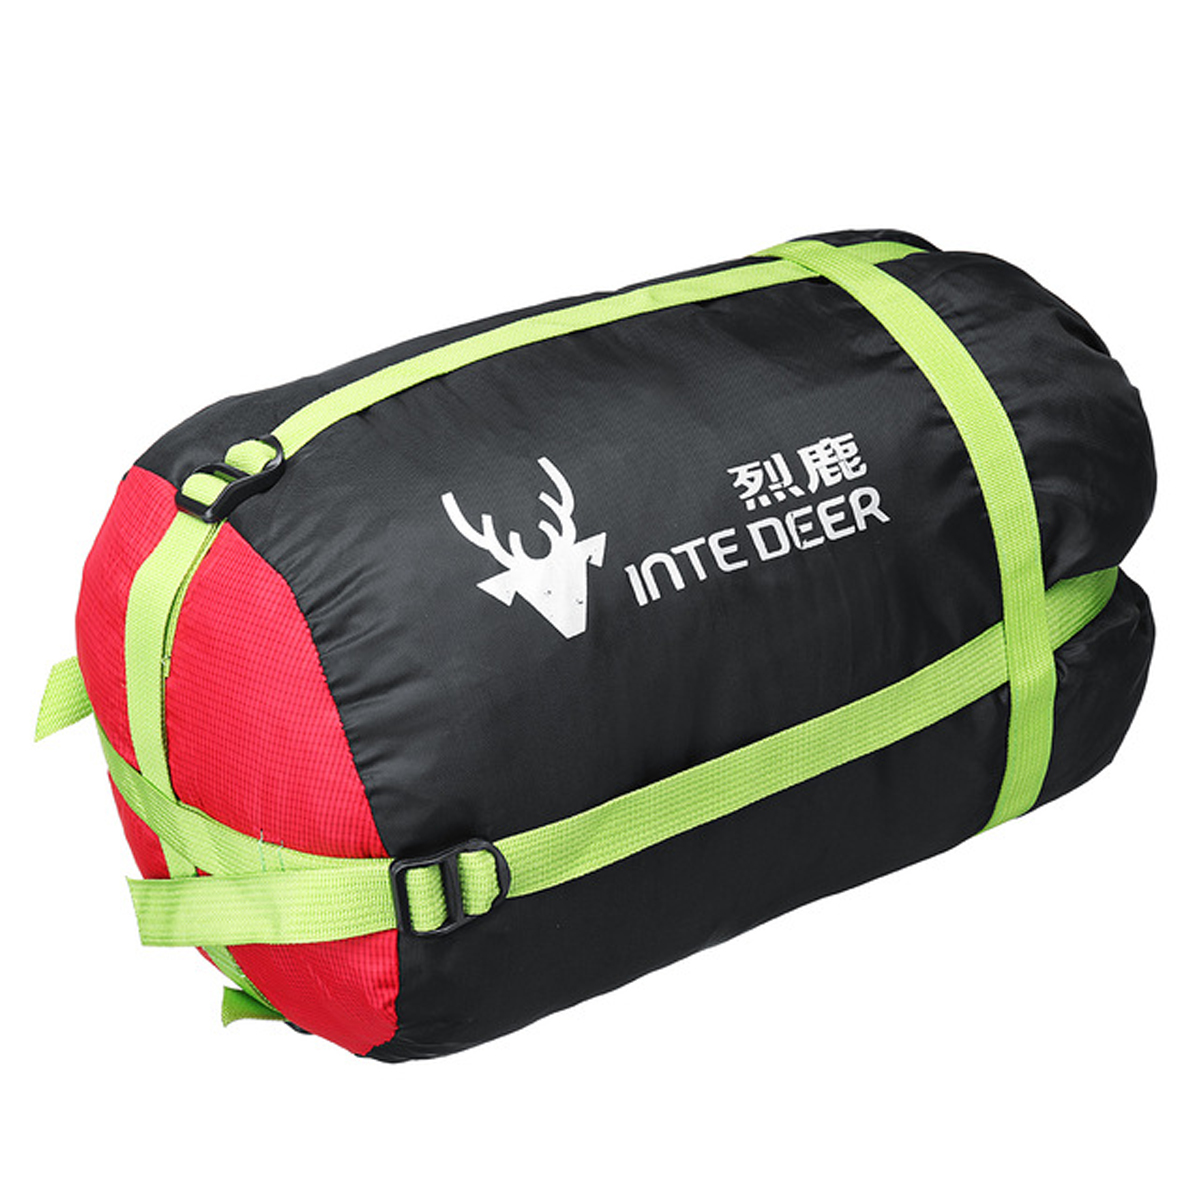 Outdoor-Camping-Portable-Sleeping-Bag-Cover-Storage-Pouch-Clothing-Compression-Sack-1346947